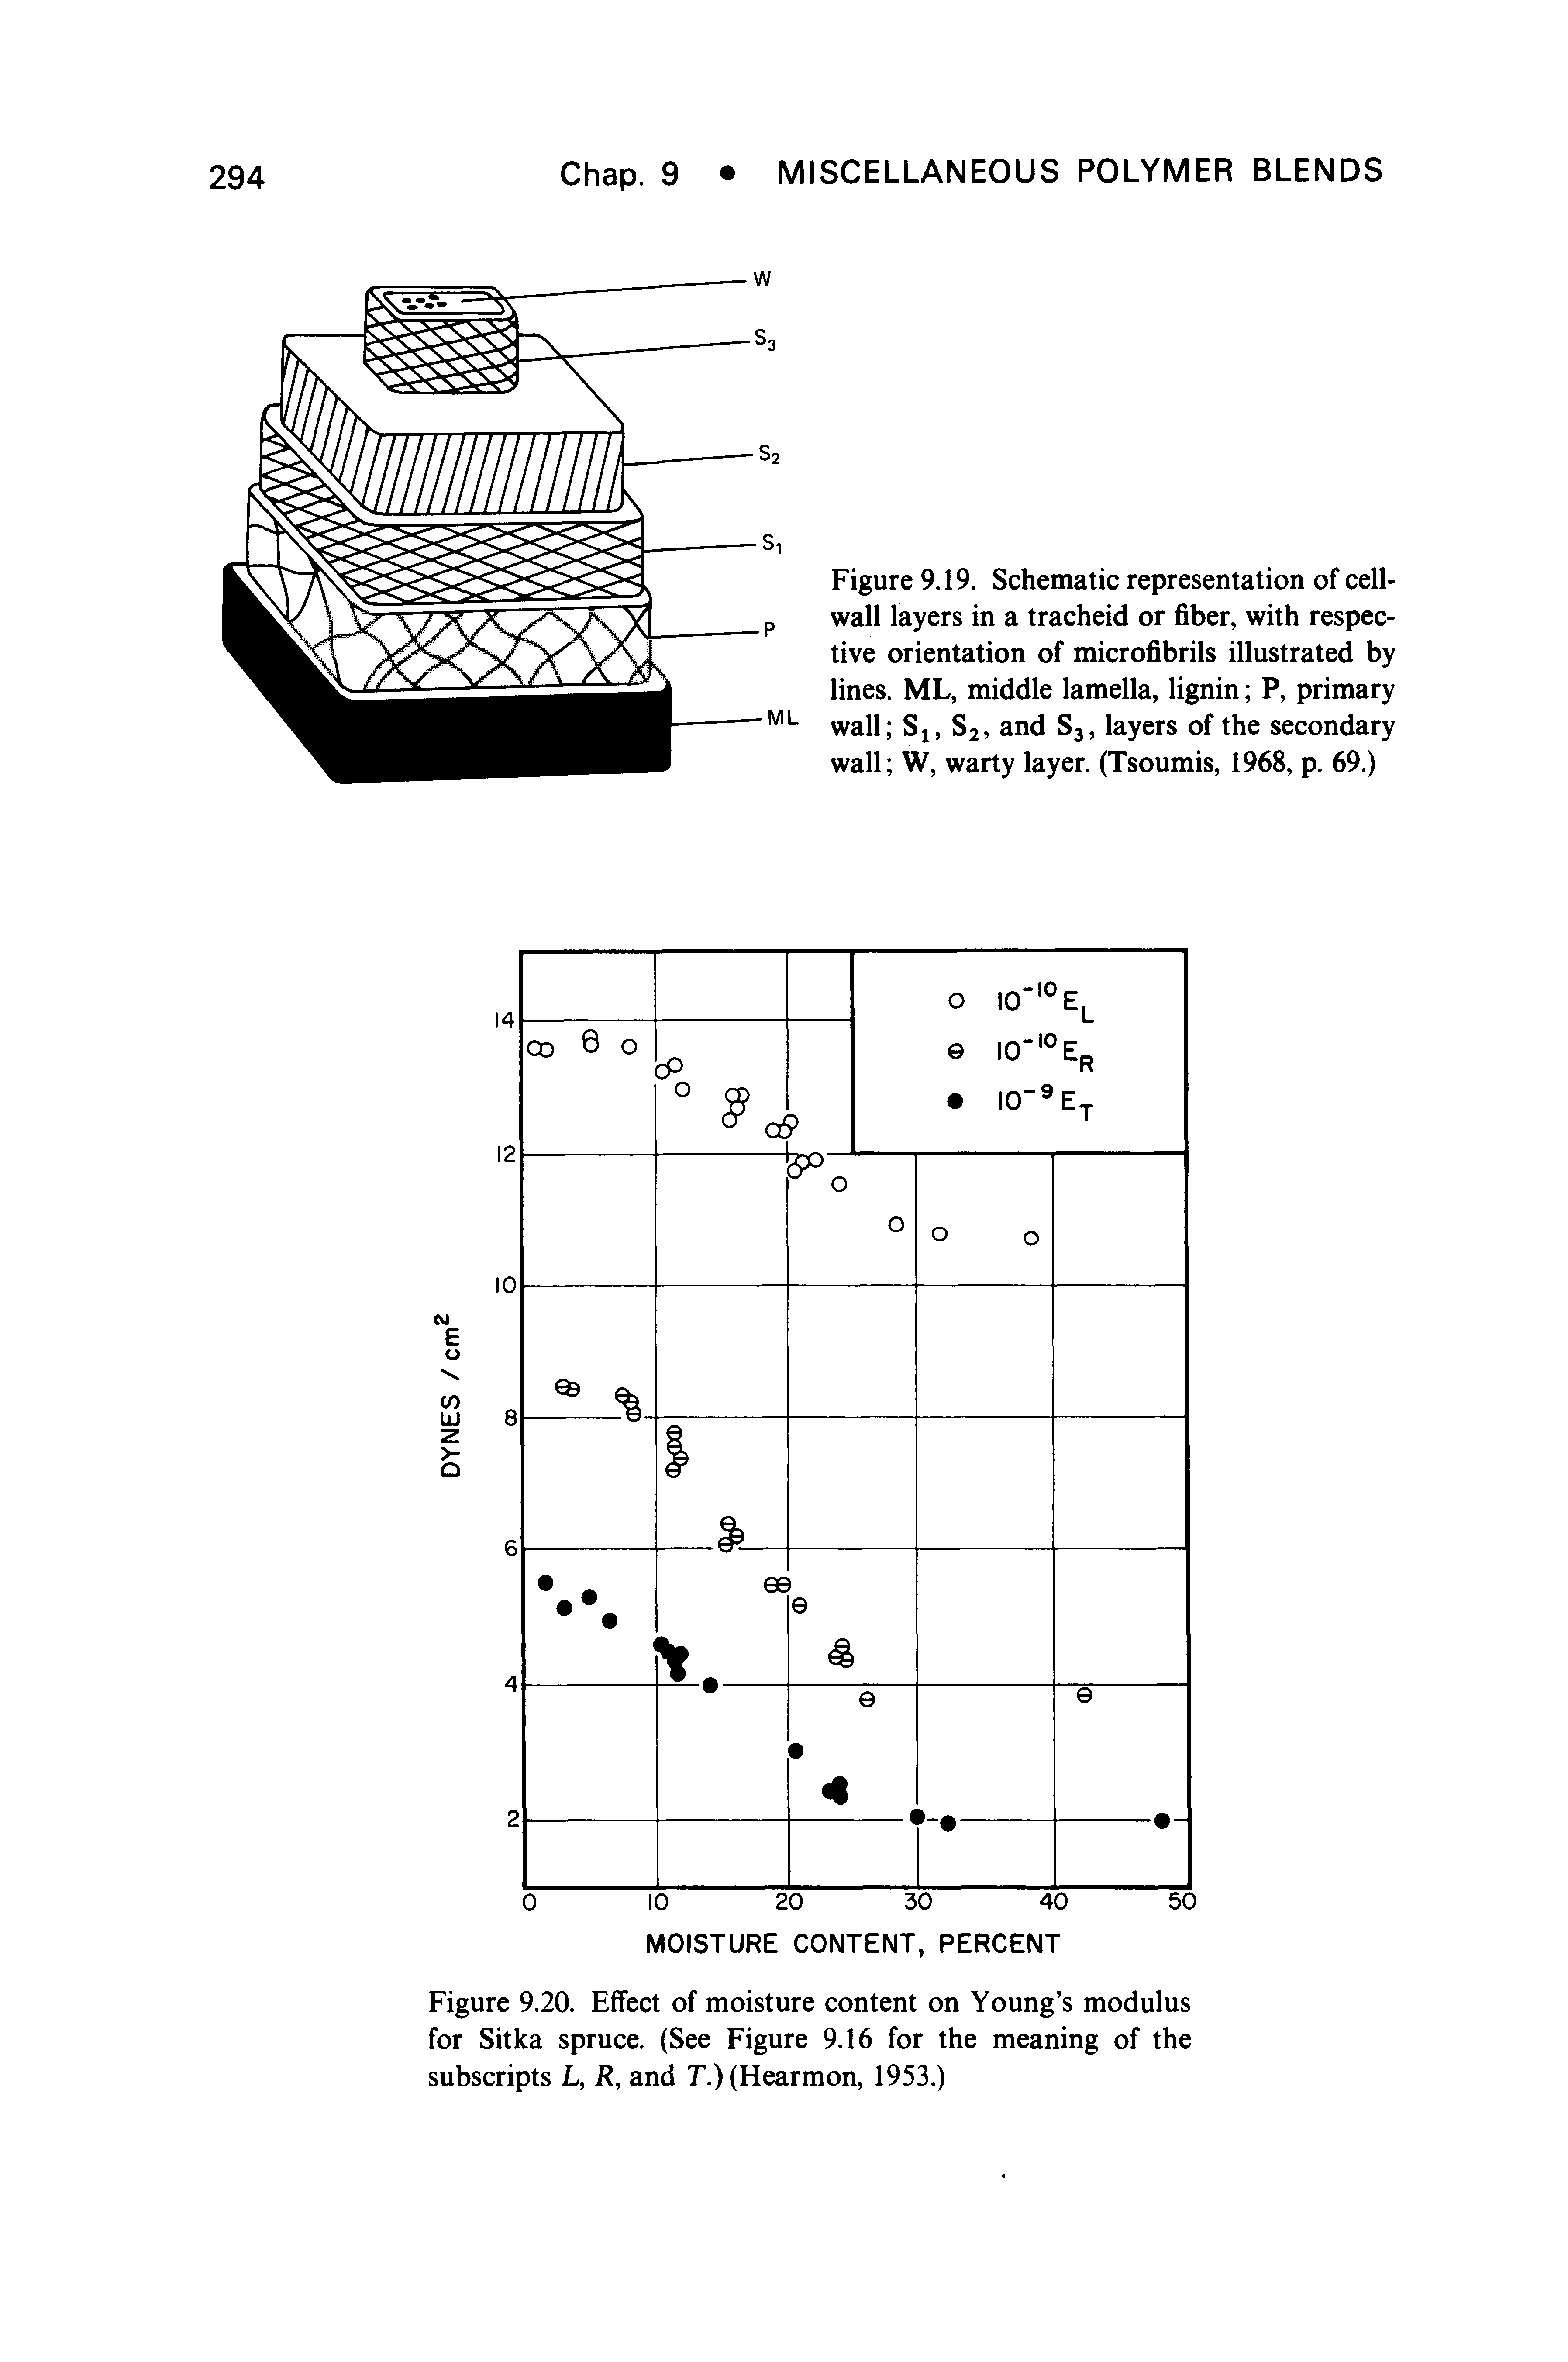 Figure 9.19. Schematic representation of cell-wall layers in a tracheid or fiber, with respective orientation of microfibrils illustrated by lines. ML, middle lamella, lignin P, primary wall Sj, S2, and S3, layers of the secondary wall W, warty layer. (Tsoumis, 1968, p. 69.)...